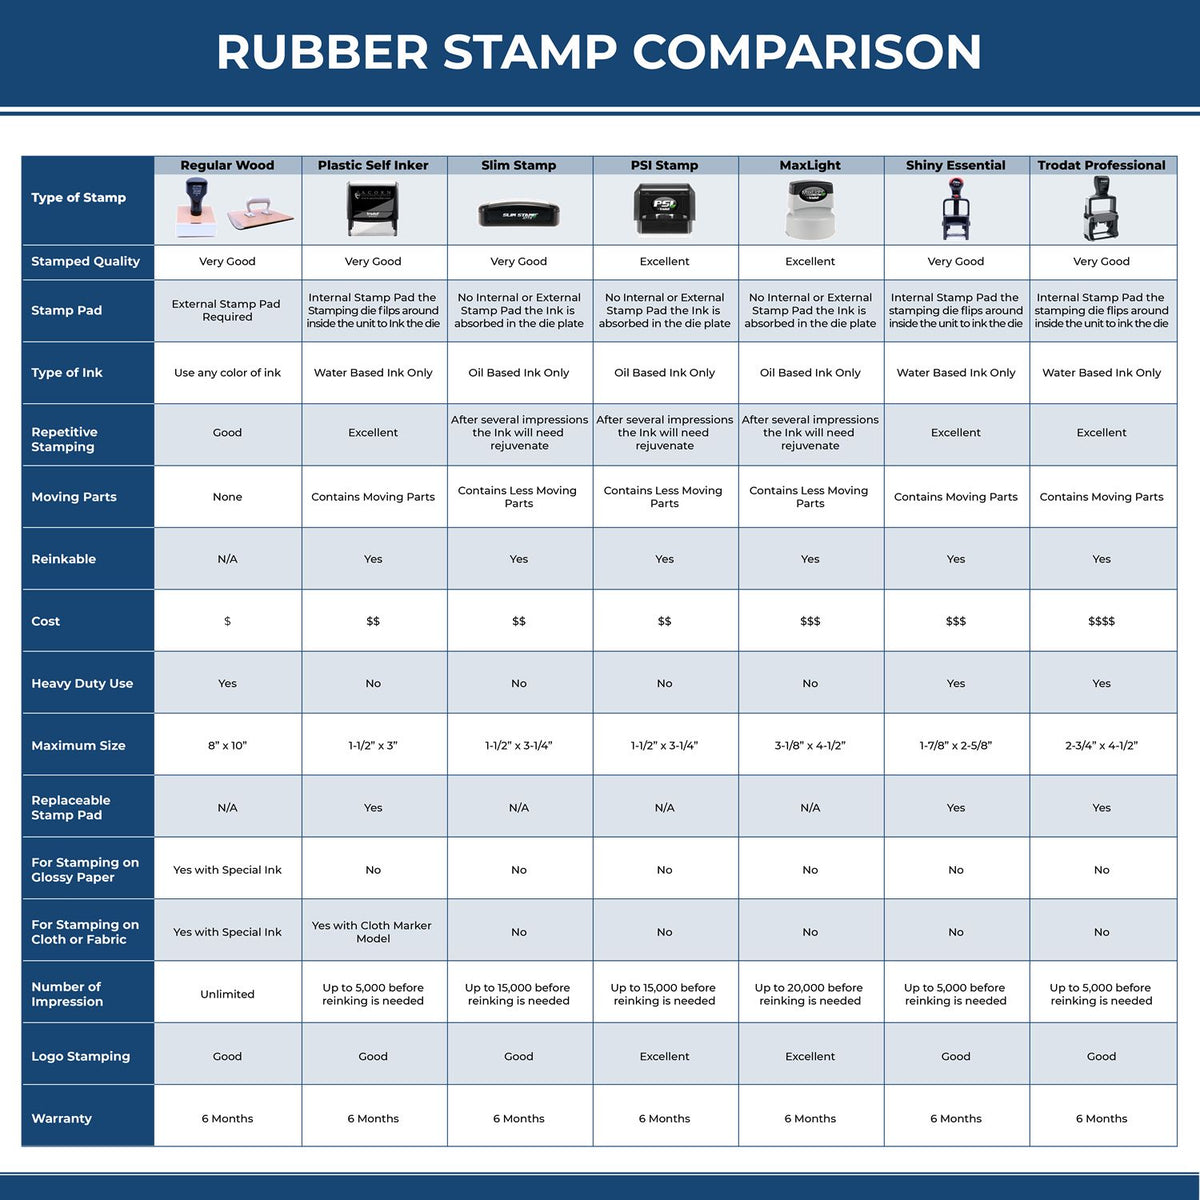 A comparison chart for the different types of mount models available for the Premium MaxLight Pre-Inked Arkansas Engineering Stamp.